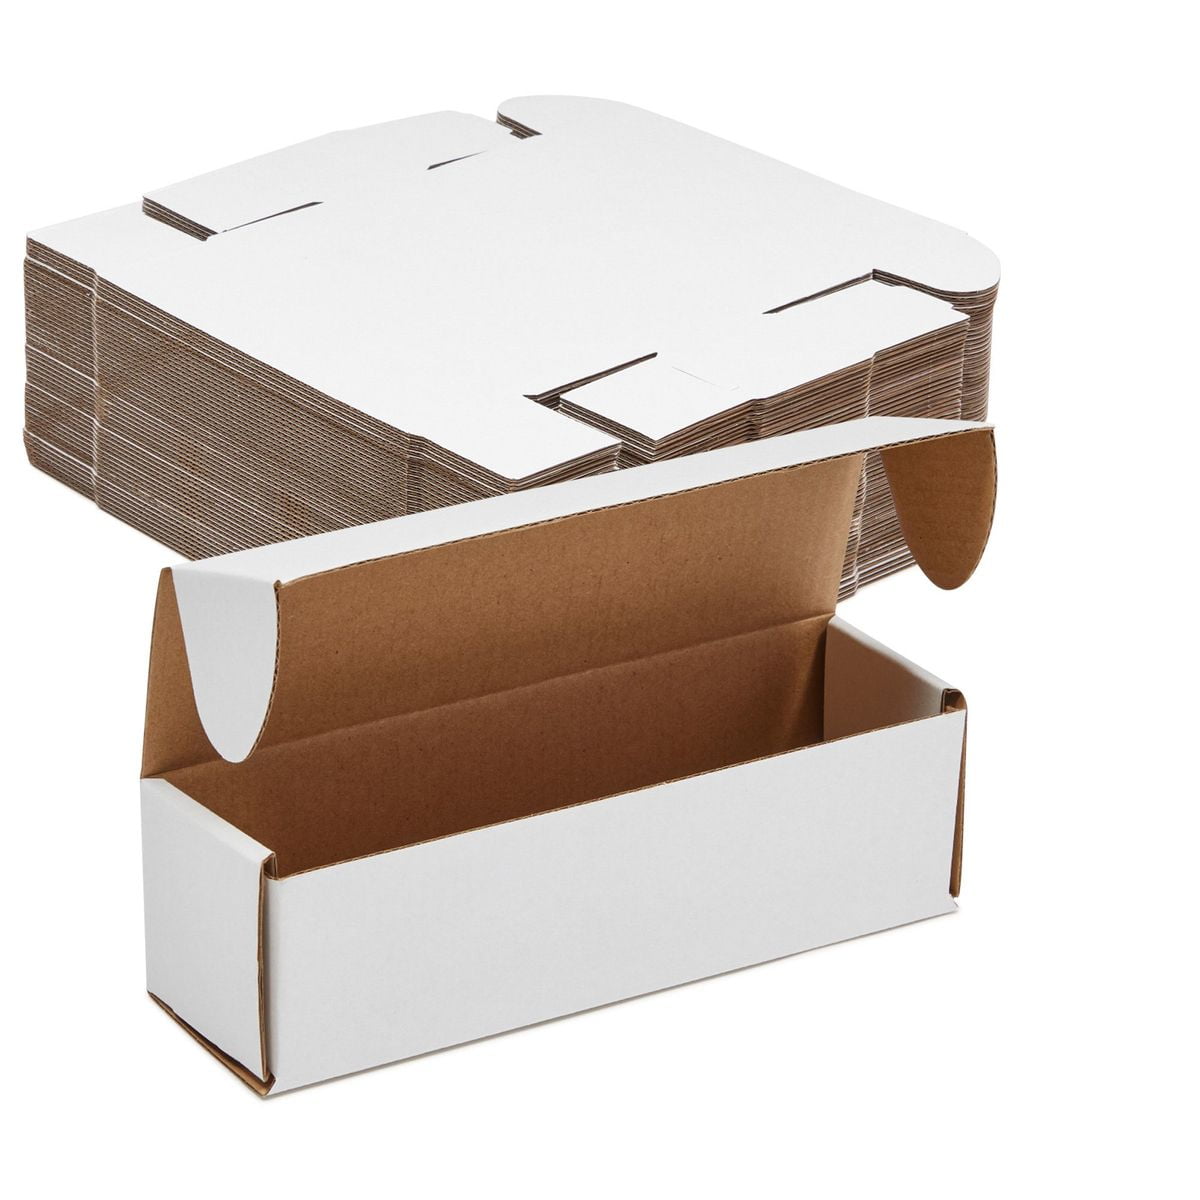 Pack of 20 Strong Corrugated Mailer 6x4x4 White Square Folding Mailing Boxes 